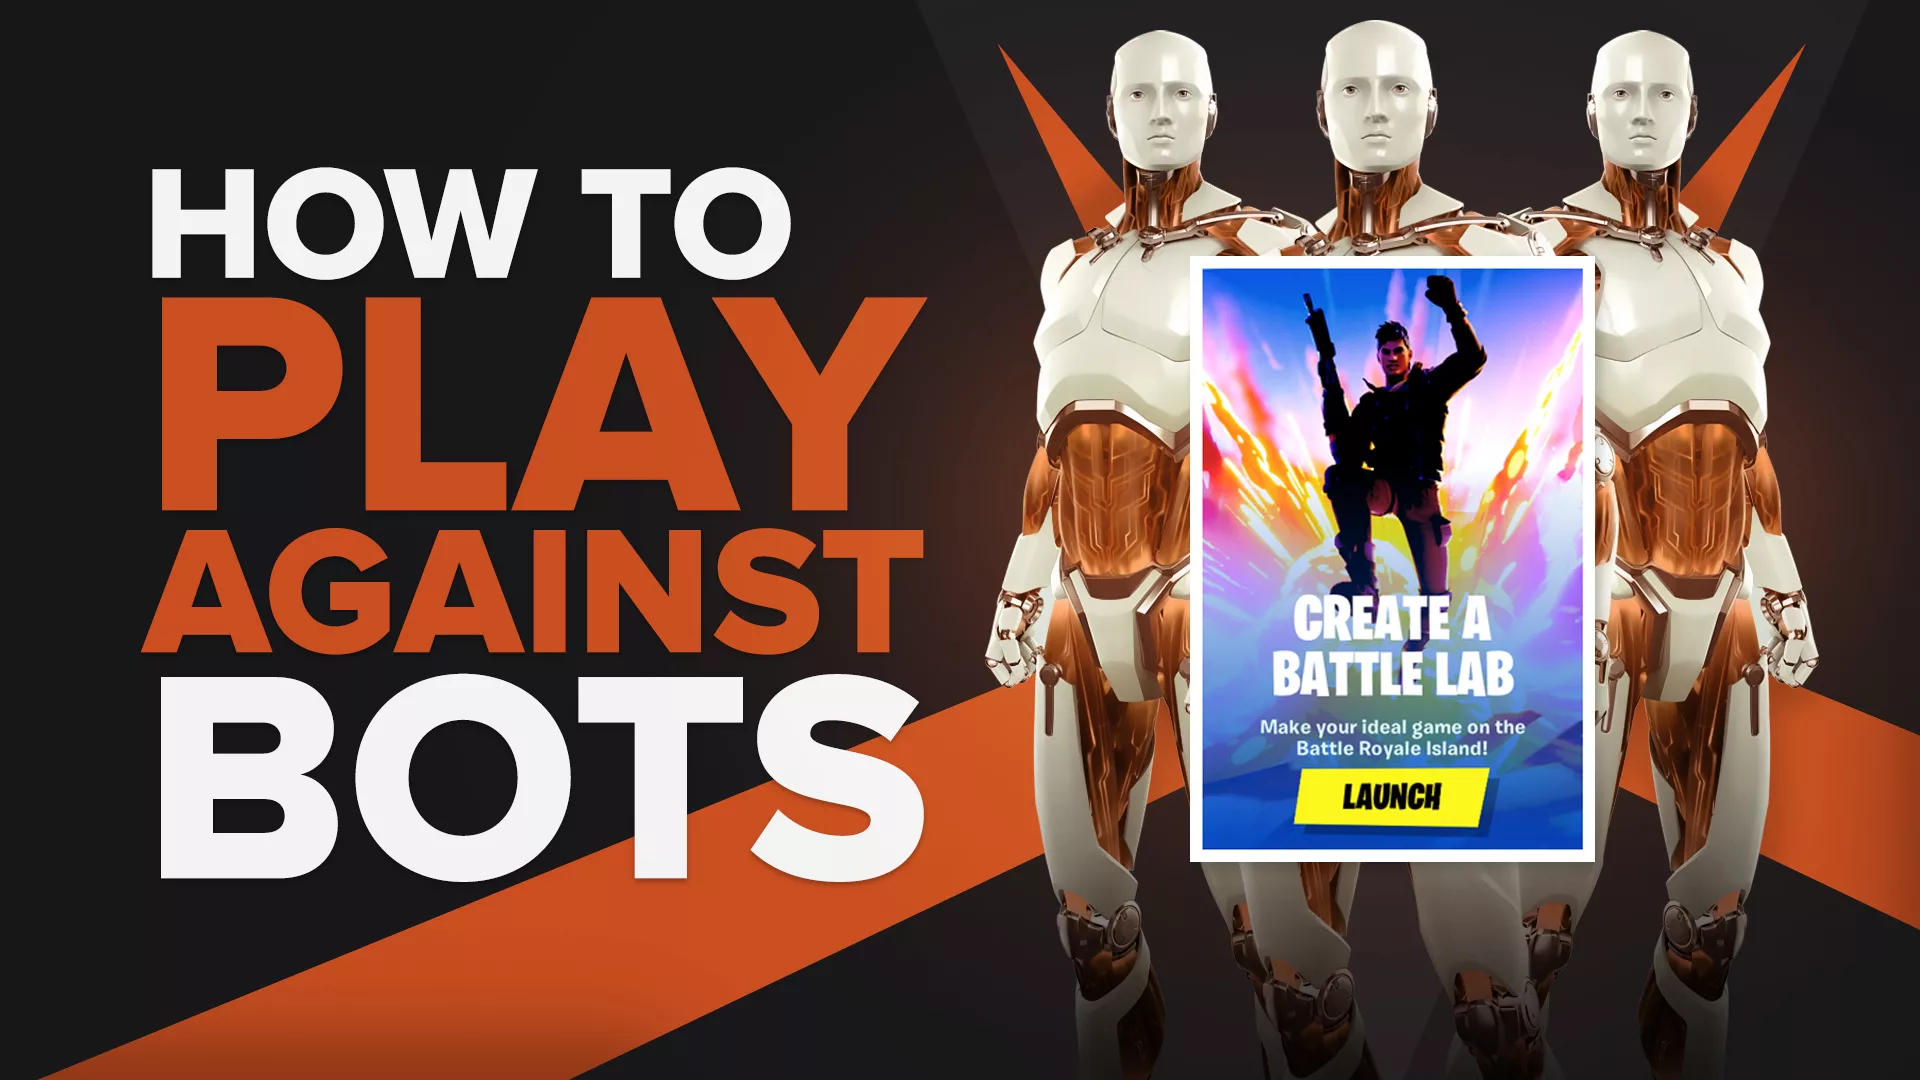 Want To Play Against Bots in Fortnite? Here's How!